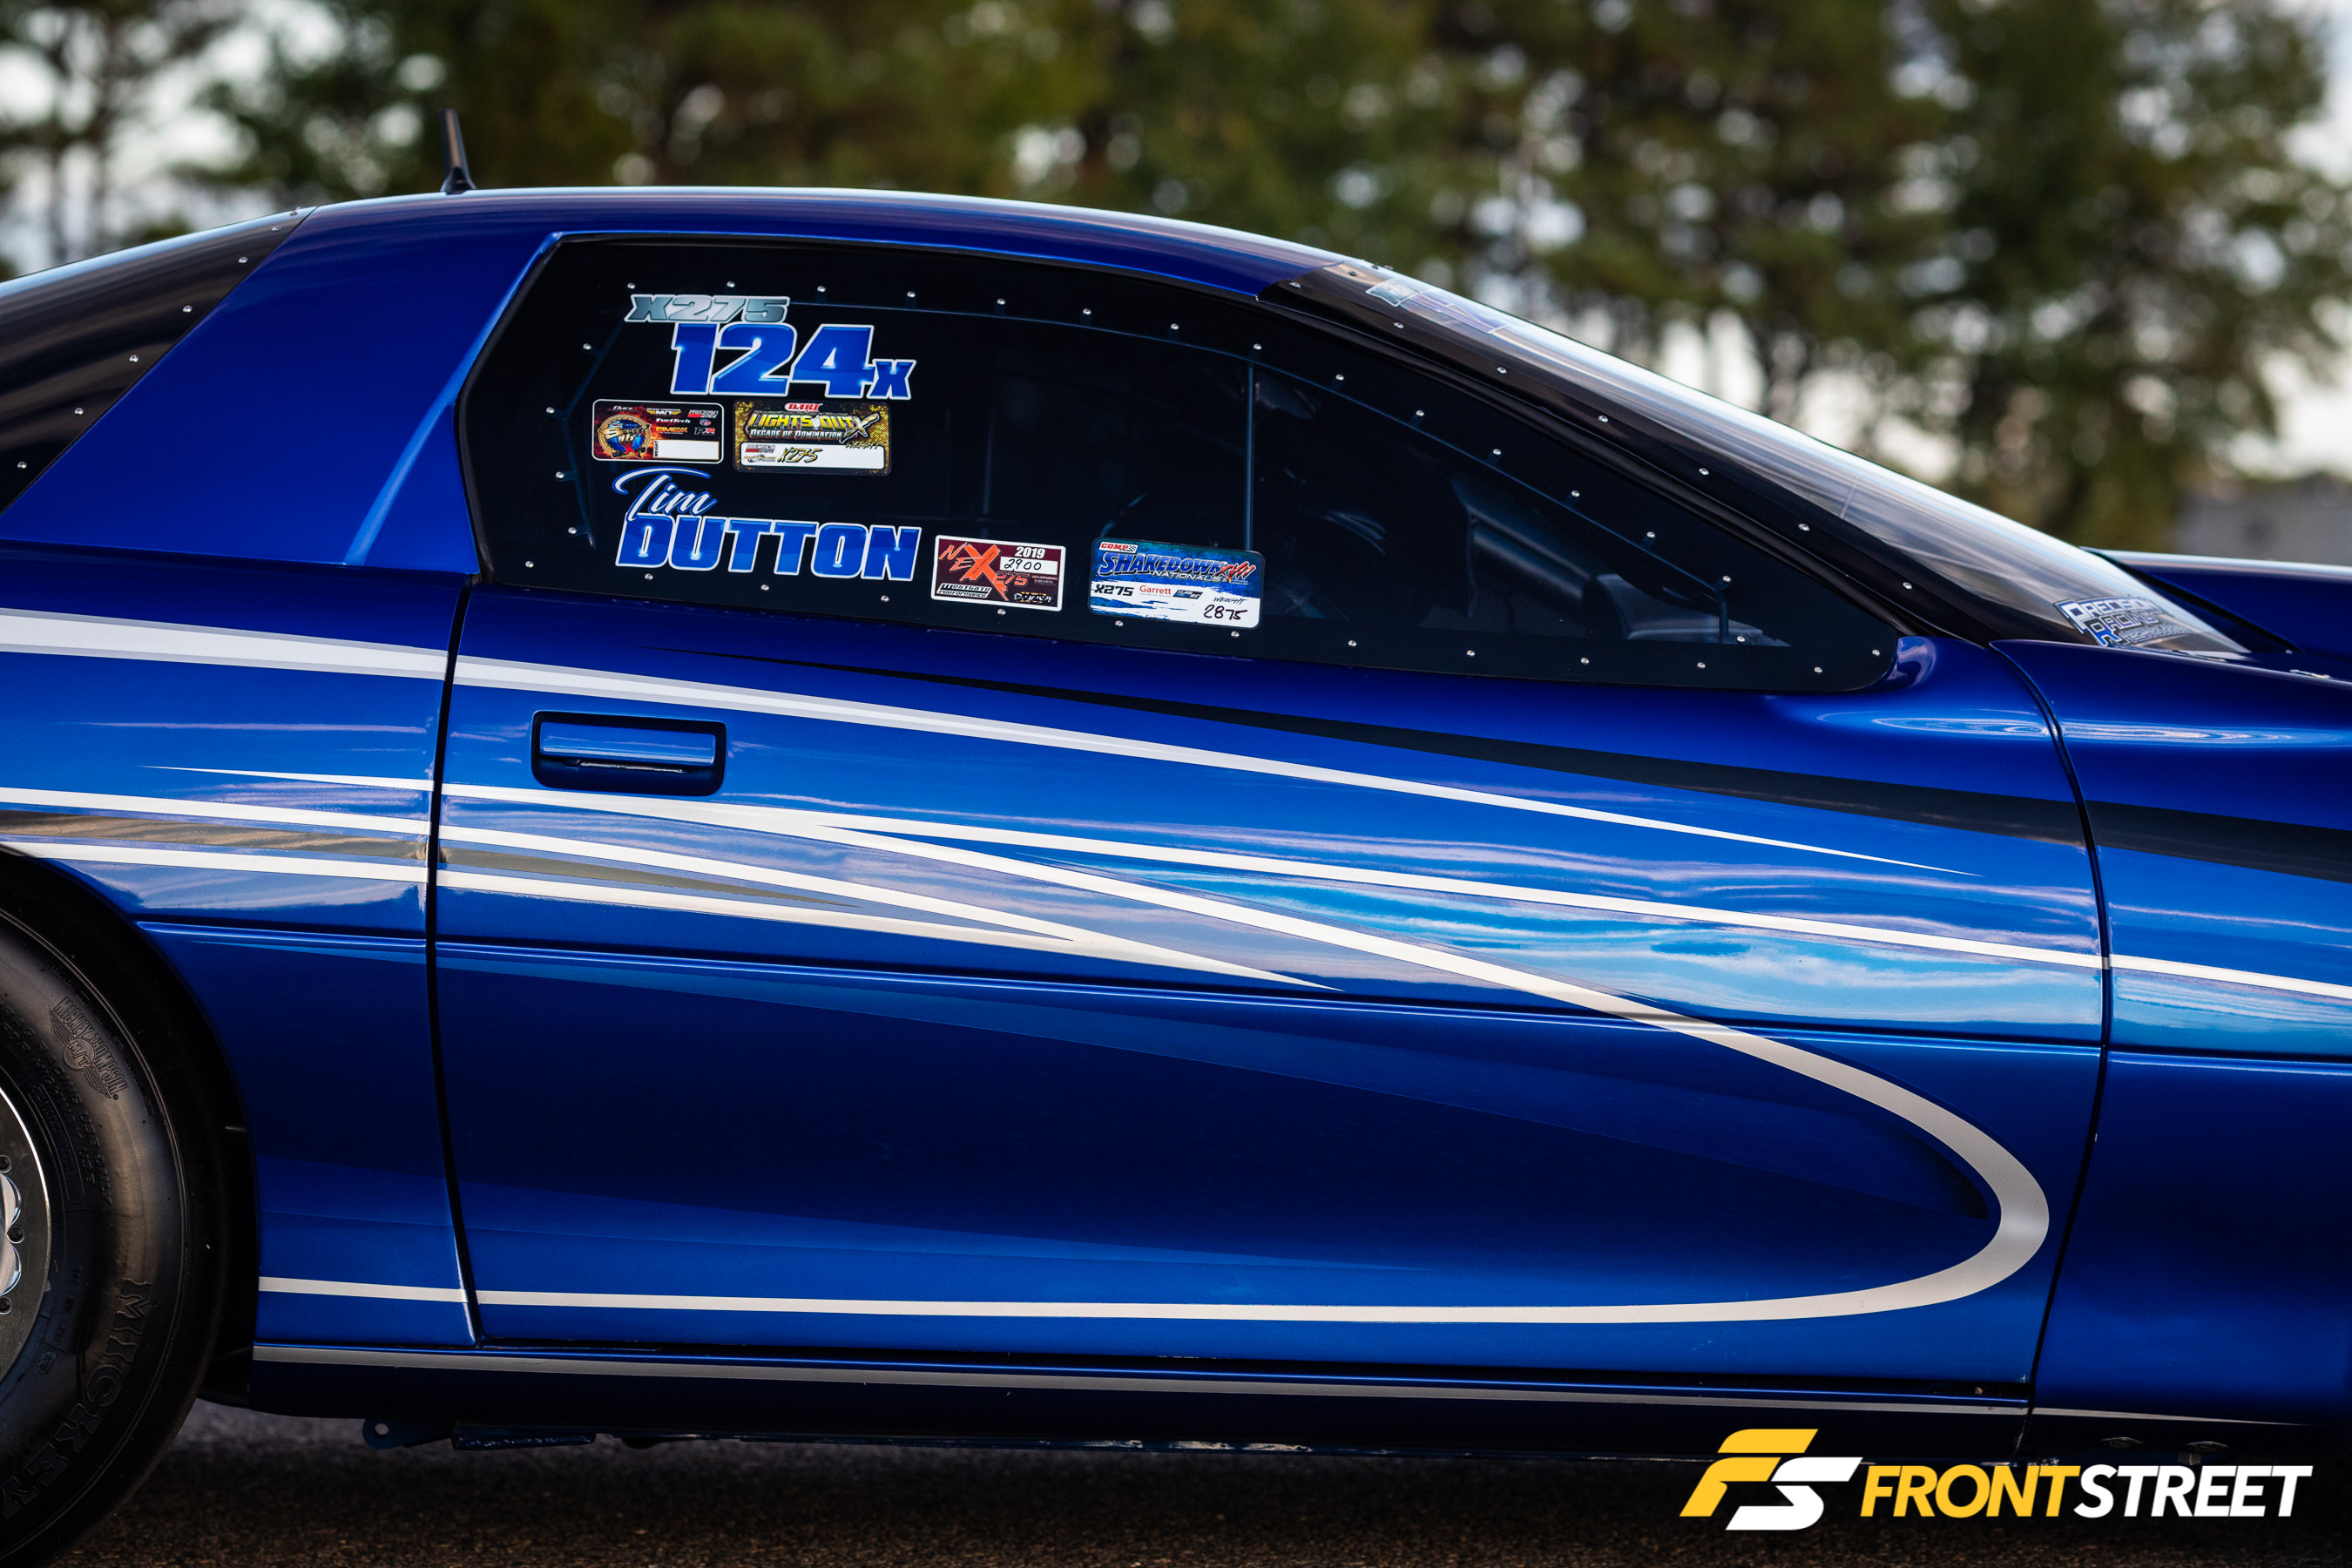 Driven To Win: Tim Dutton's X275 Camaro Is Primed For Success